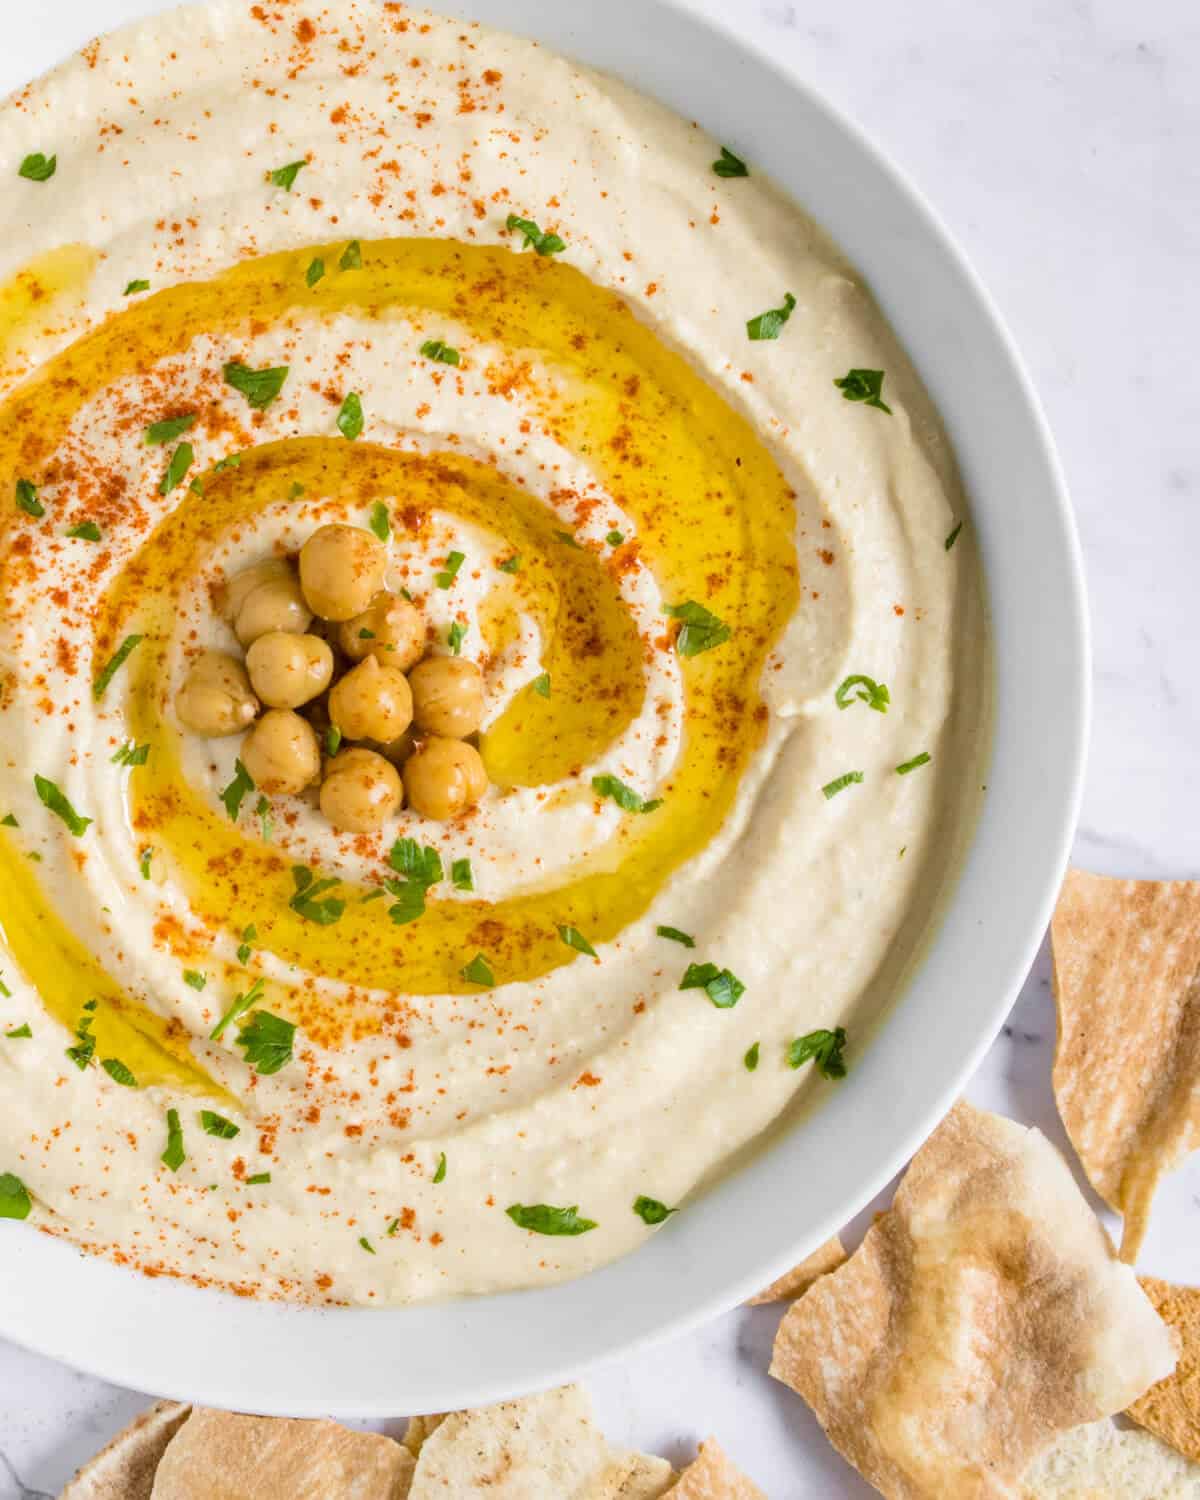 Hummus served in a bowl with pita chips on the side